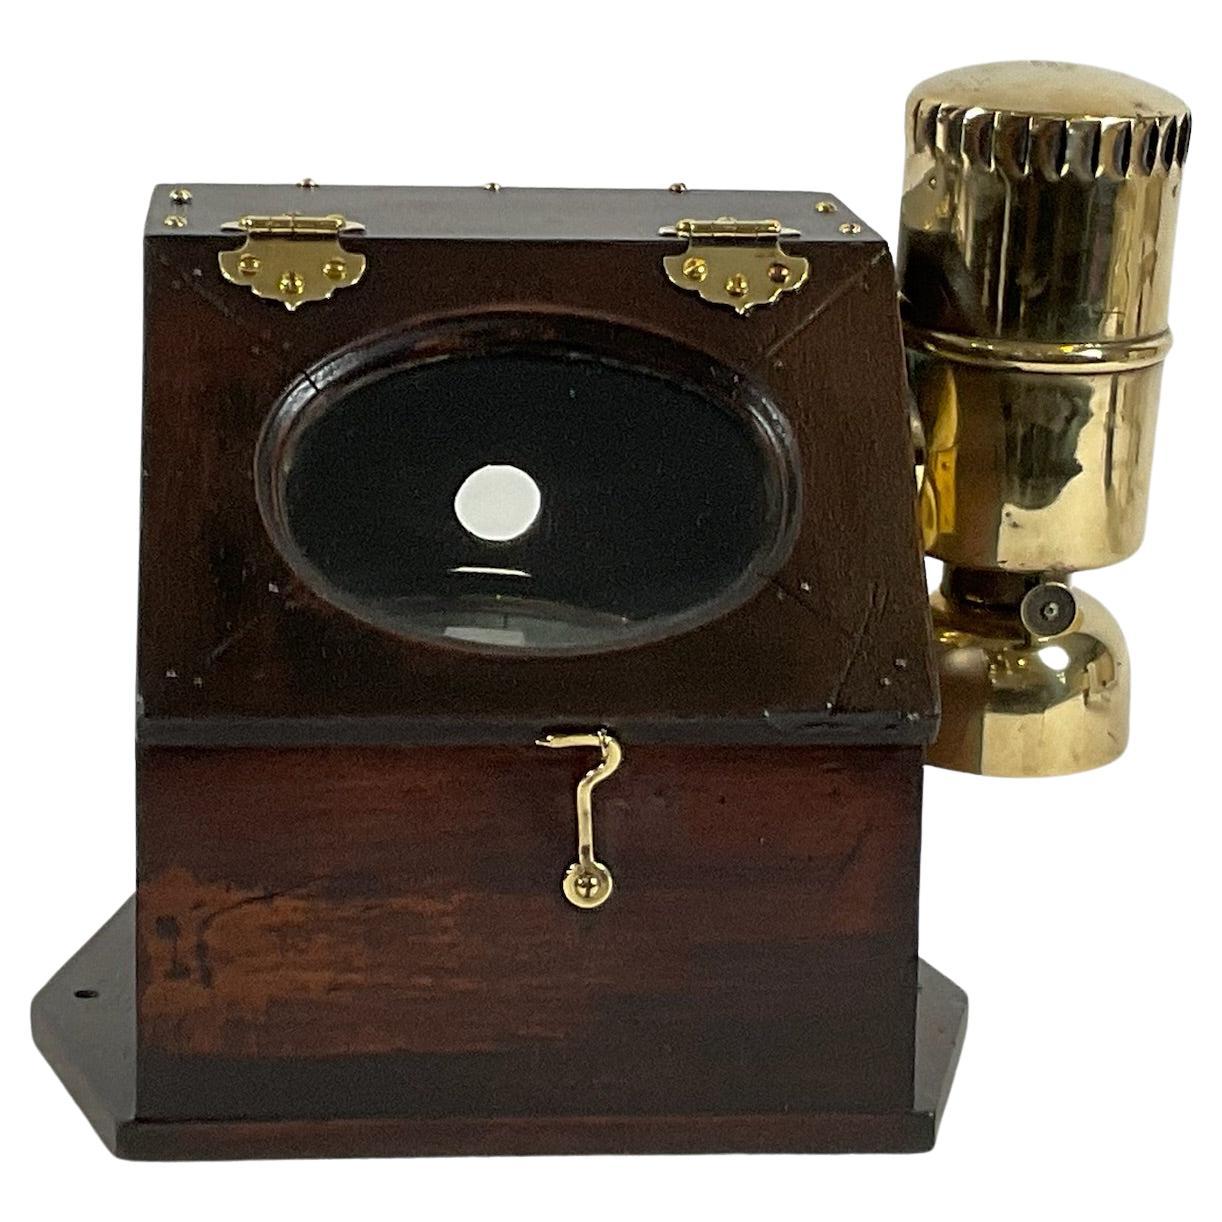 Boat Binnacle Compass from the 19th Century